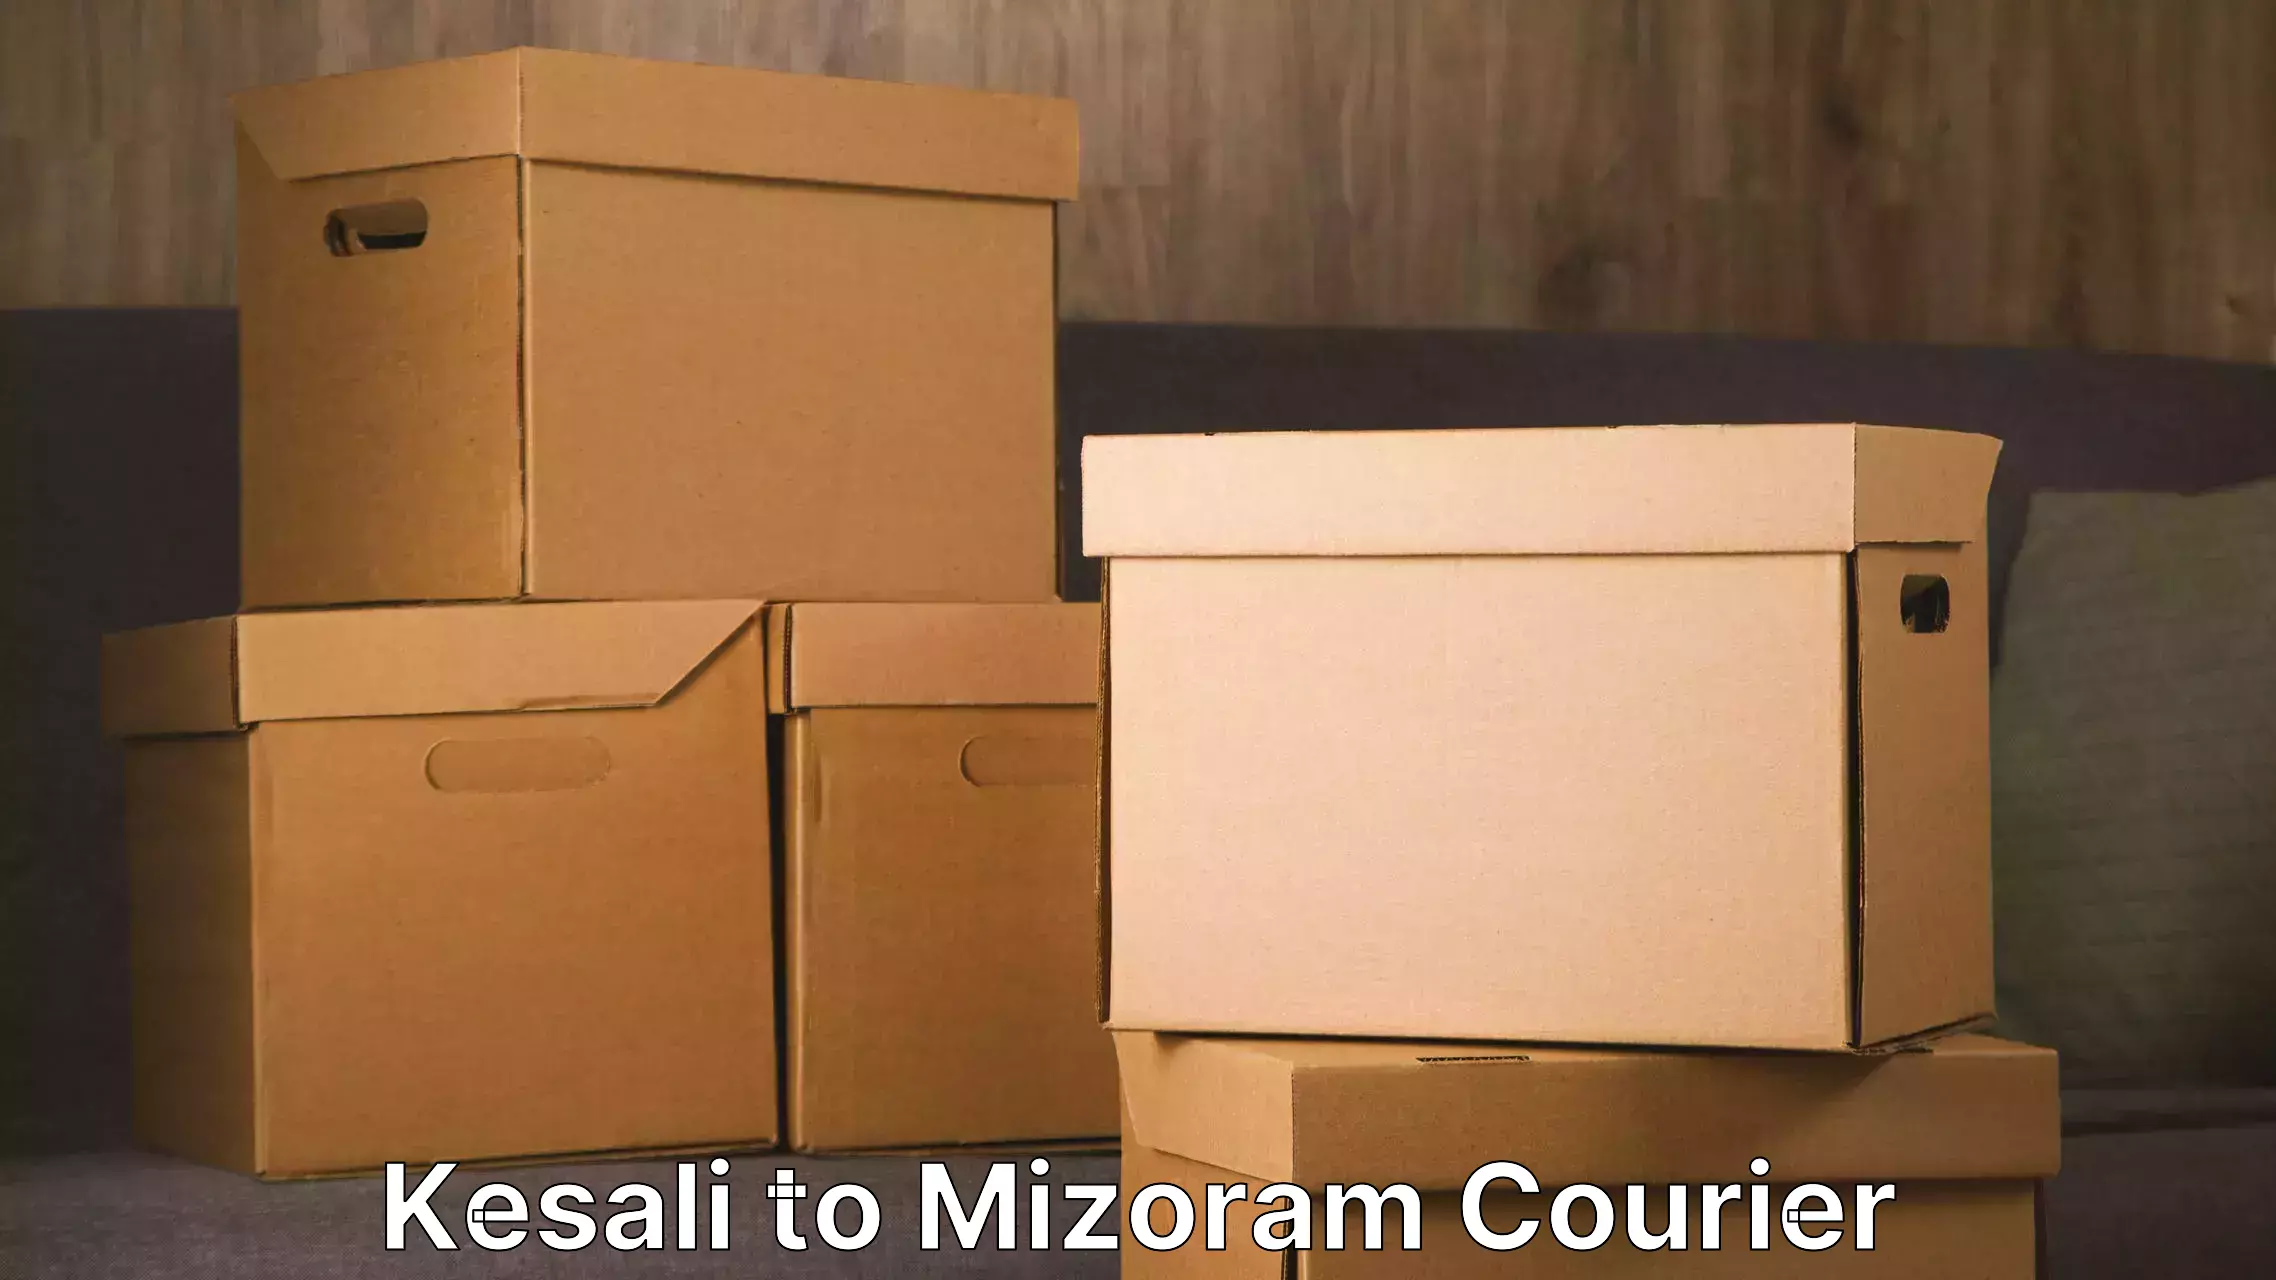 Professional movers and packers Kesali to Mizoram